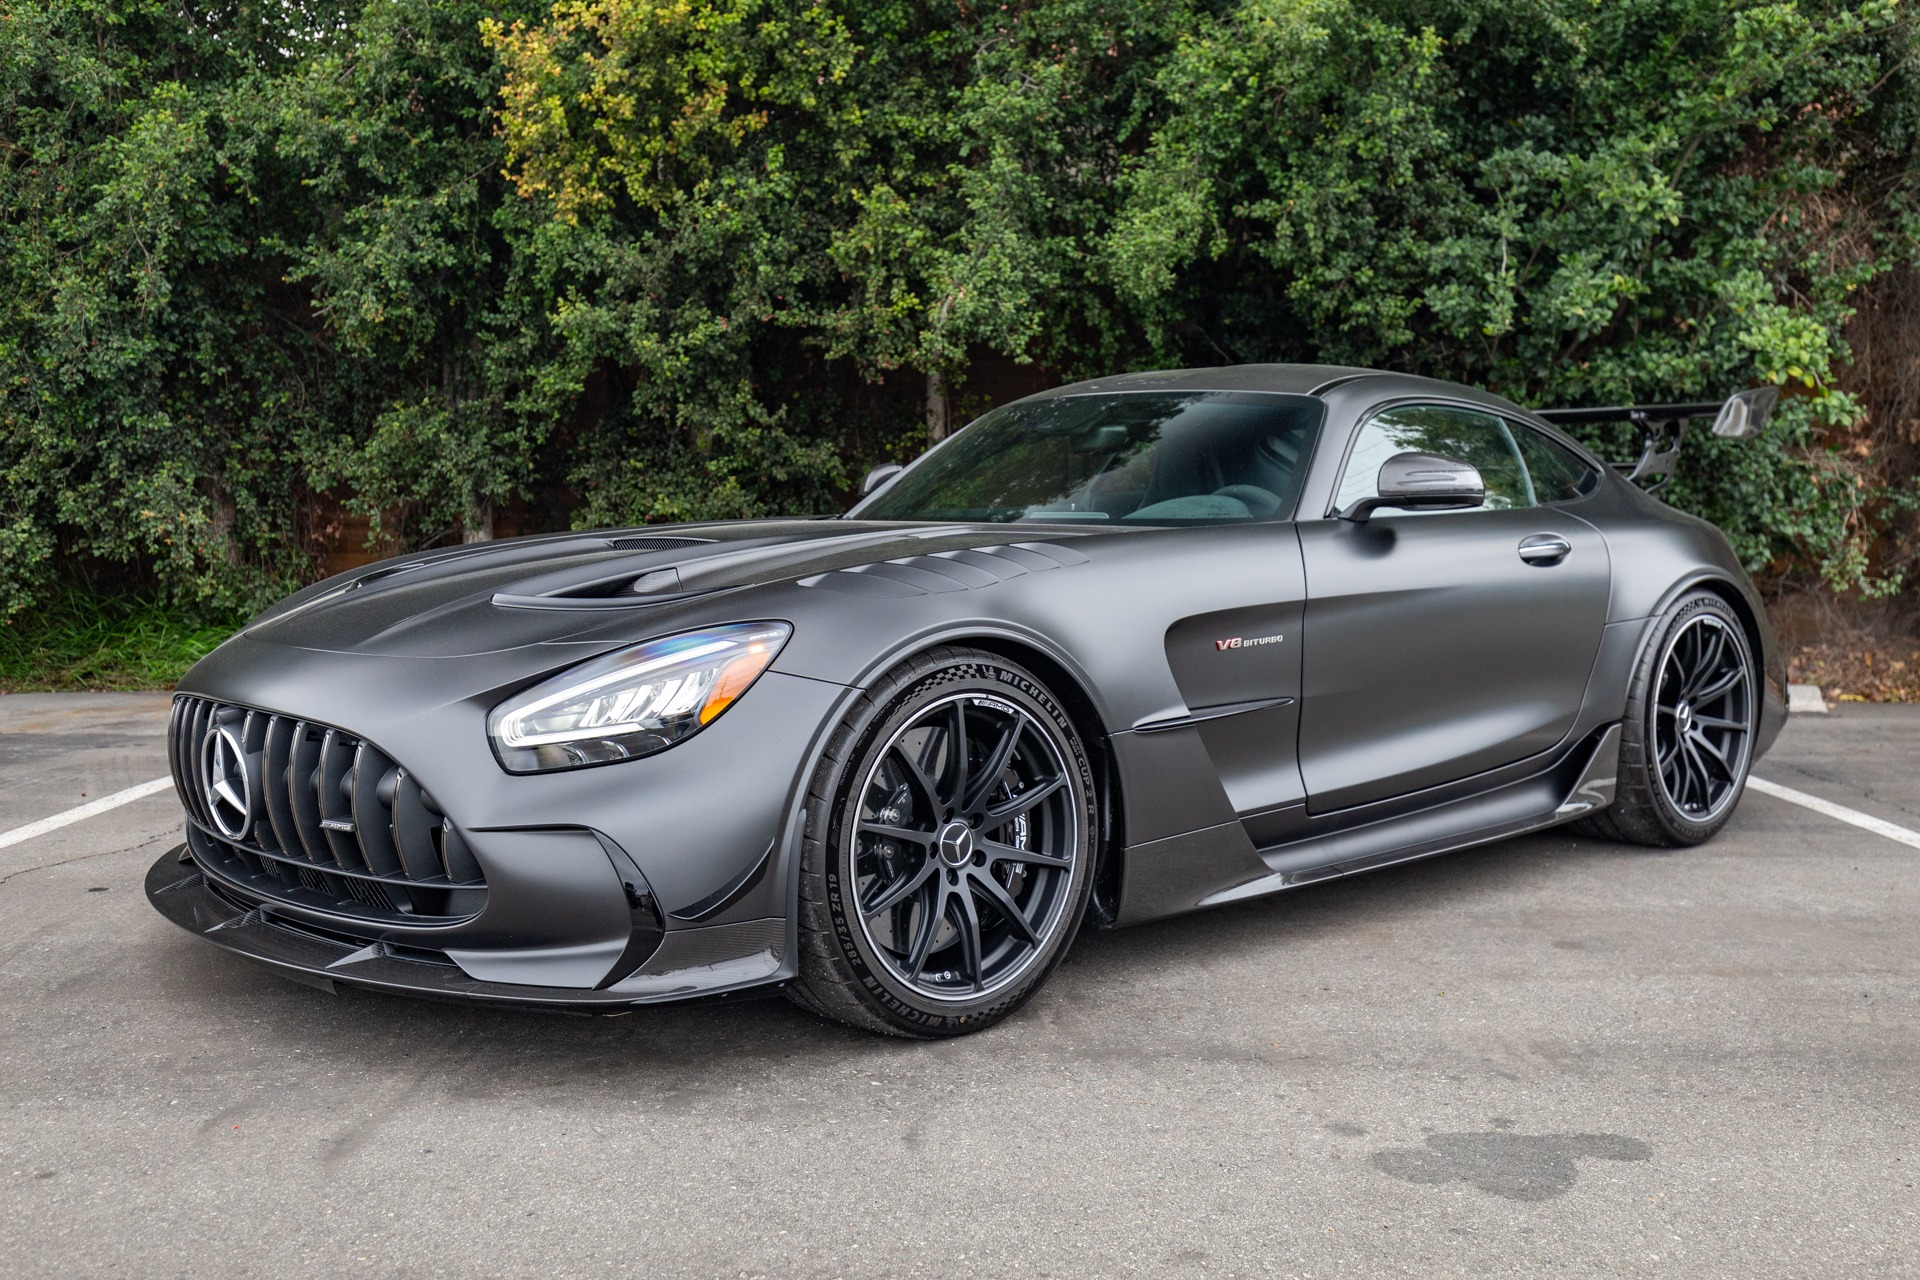 Used 2021 Mercedes Benz Amg Gt Black Series For Sale Sold Ilusso Stock 041724 